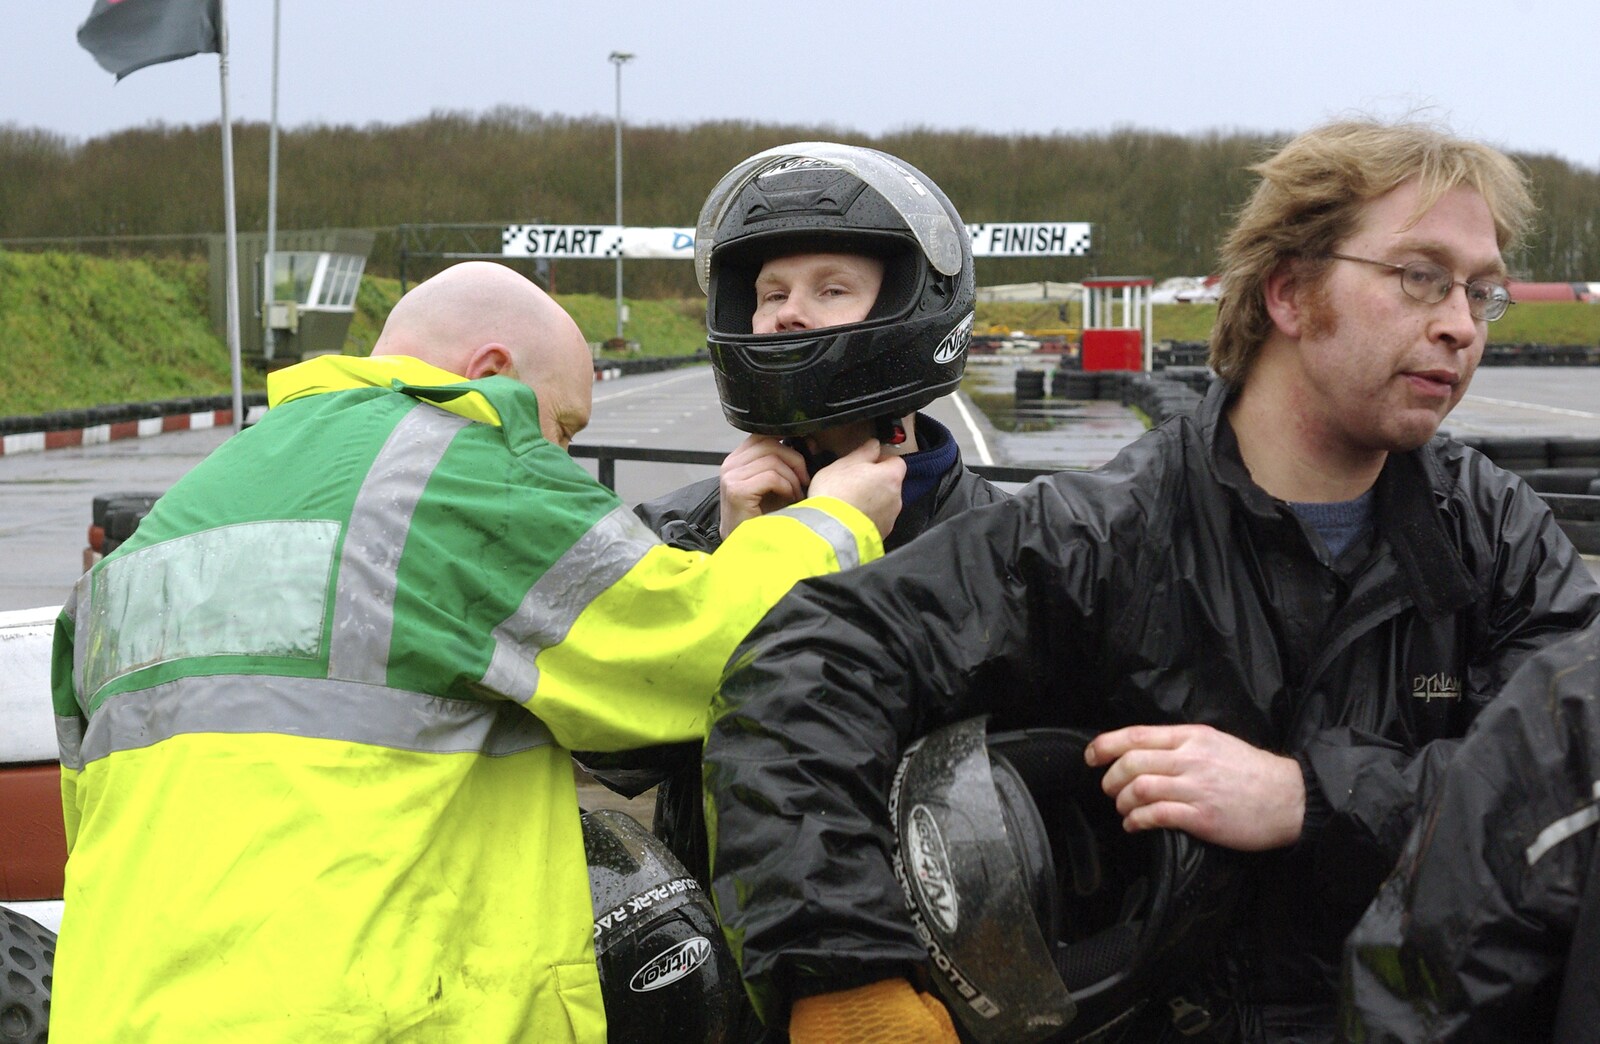 Gov's Stag-Day Karting, Ellough Airfield, Beccles, Suffolk - 19th January 2008: Gov helps Mikey-P out of his helmet